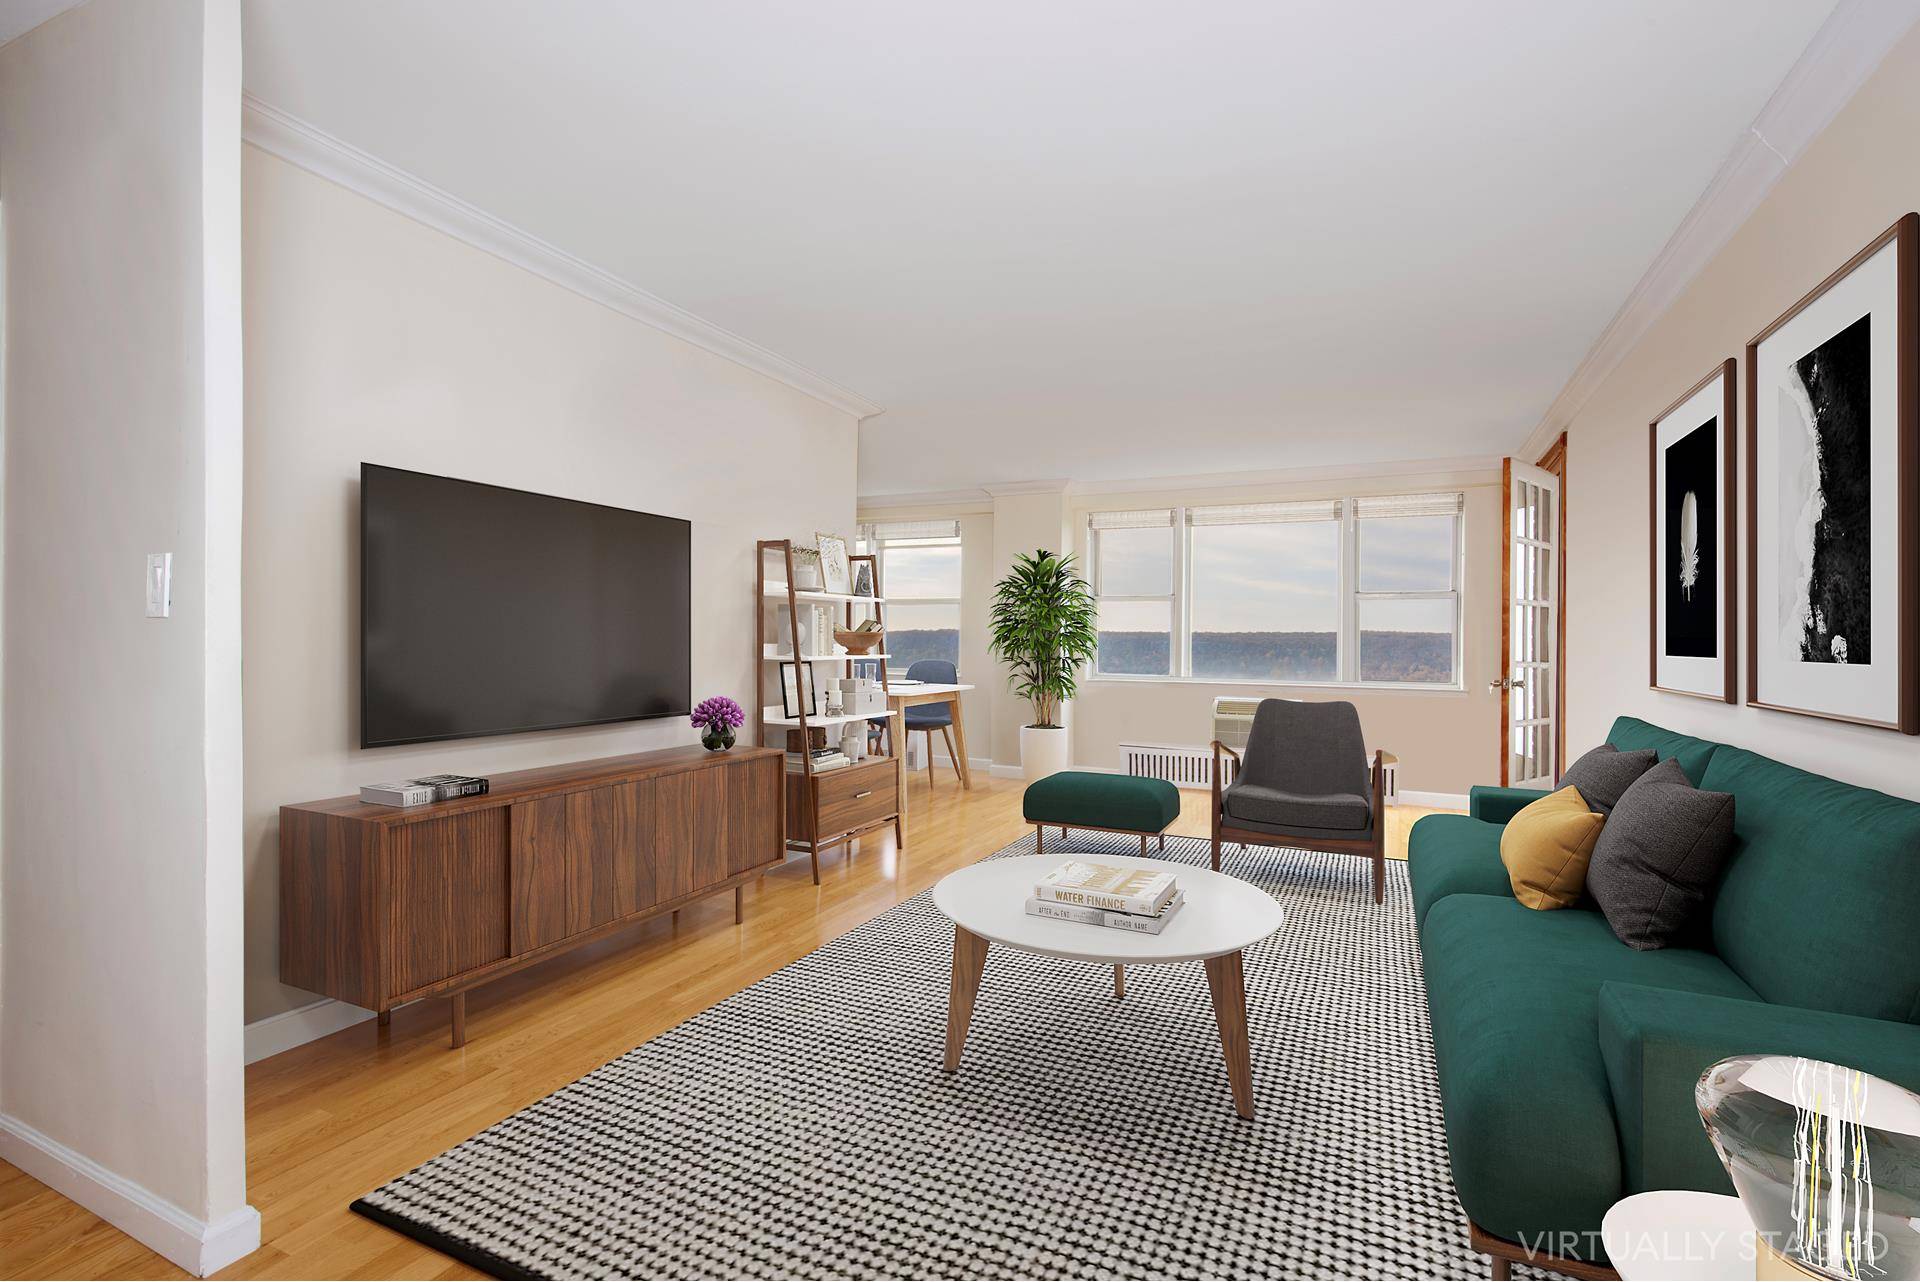 This beautifully renovated convertible three bed two bath home is highlighted by the scenic Hudson River and Palisades views.